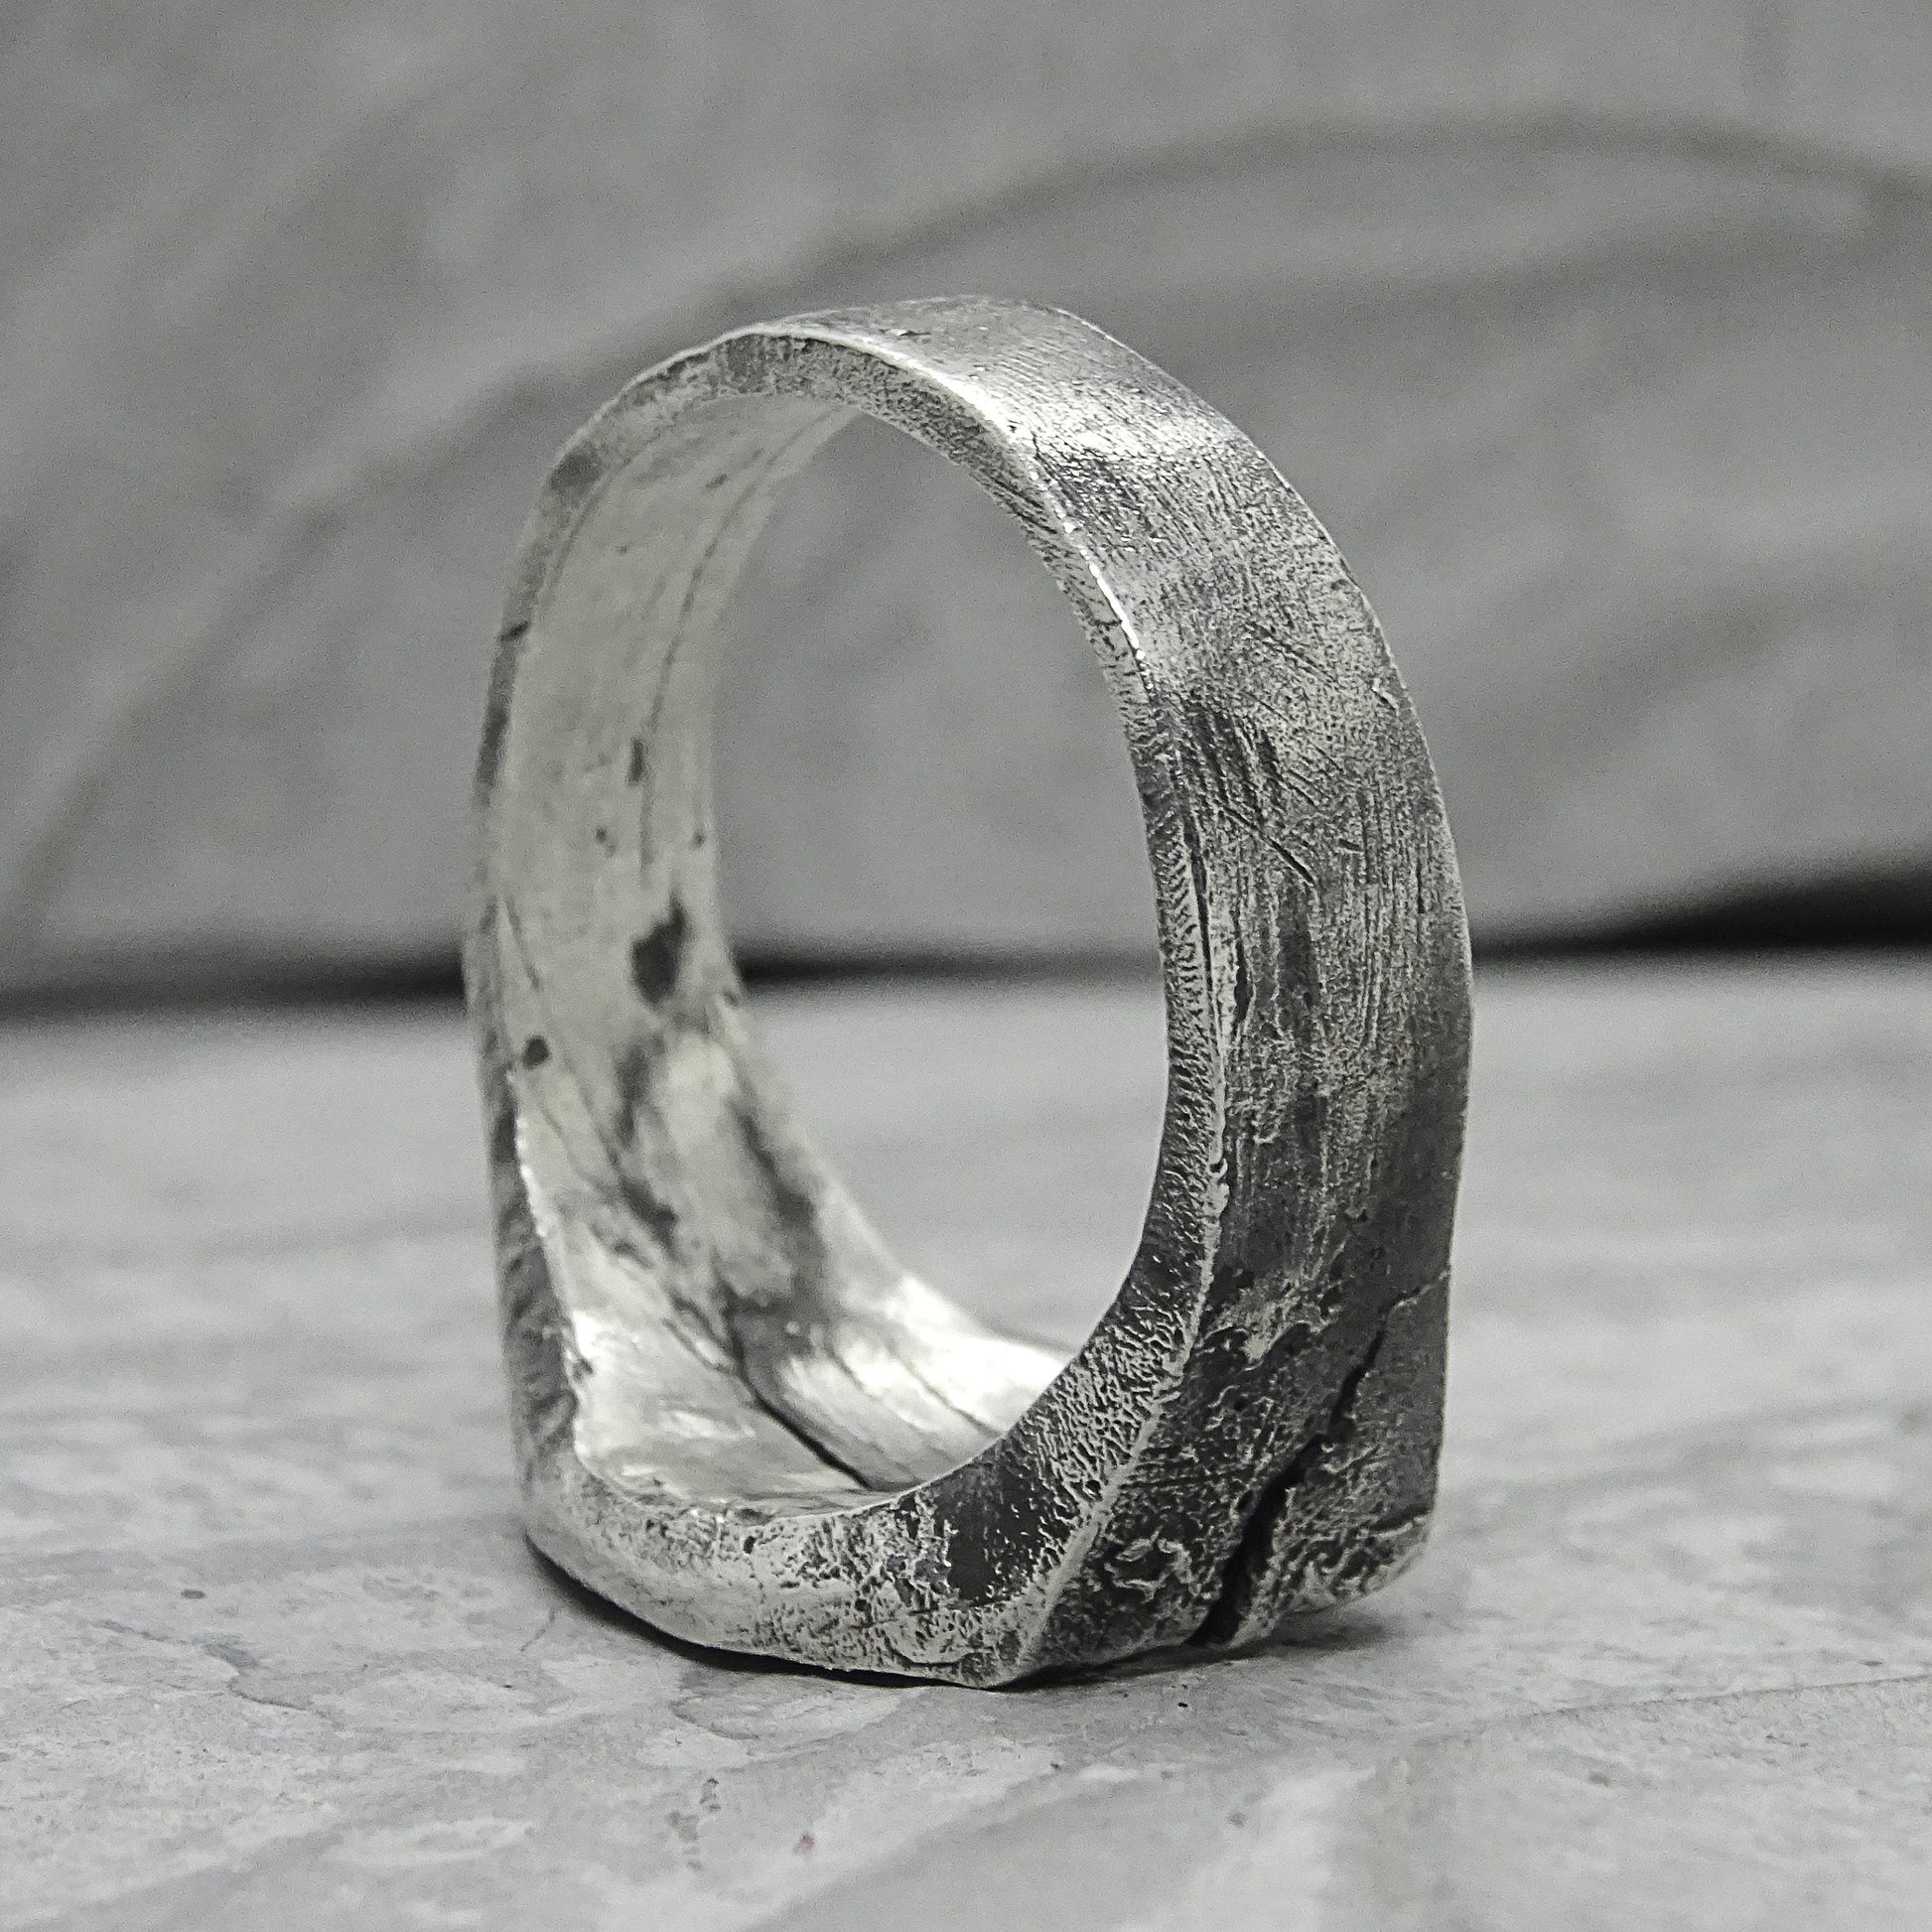 Fault ring - textured signet ring with a crack Signet rings Project50g 